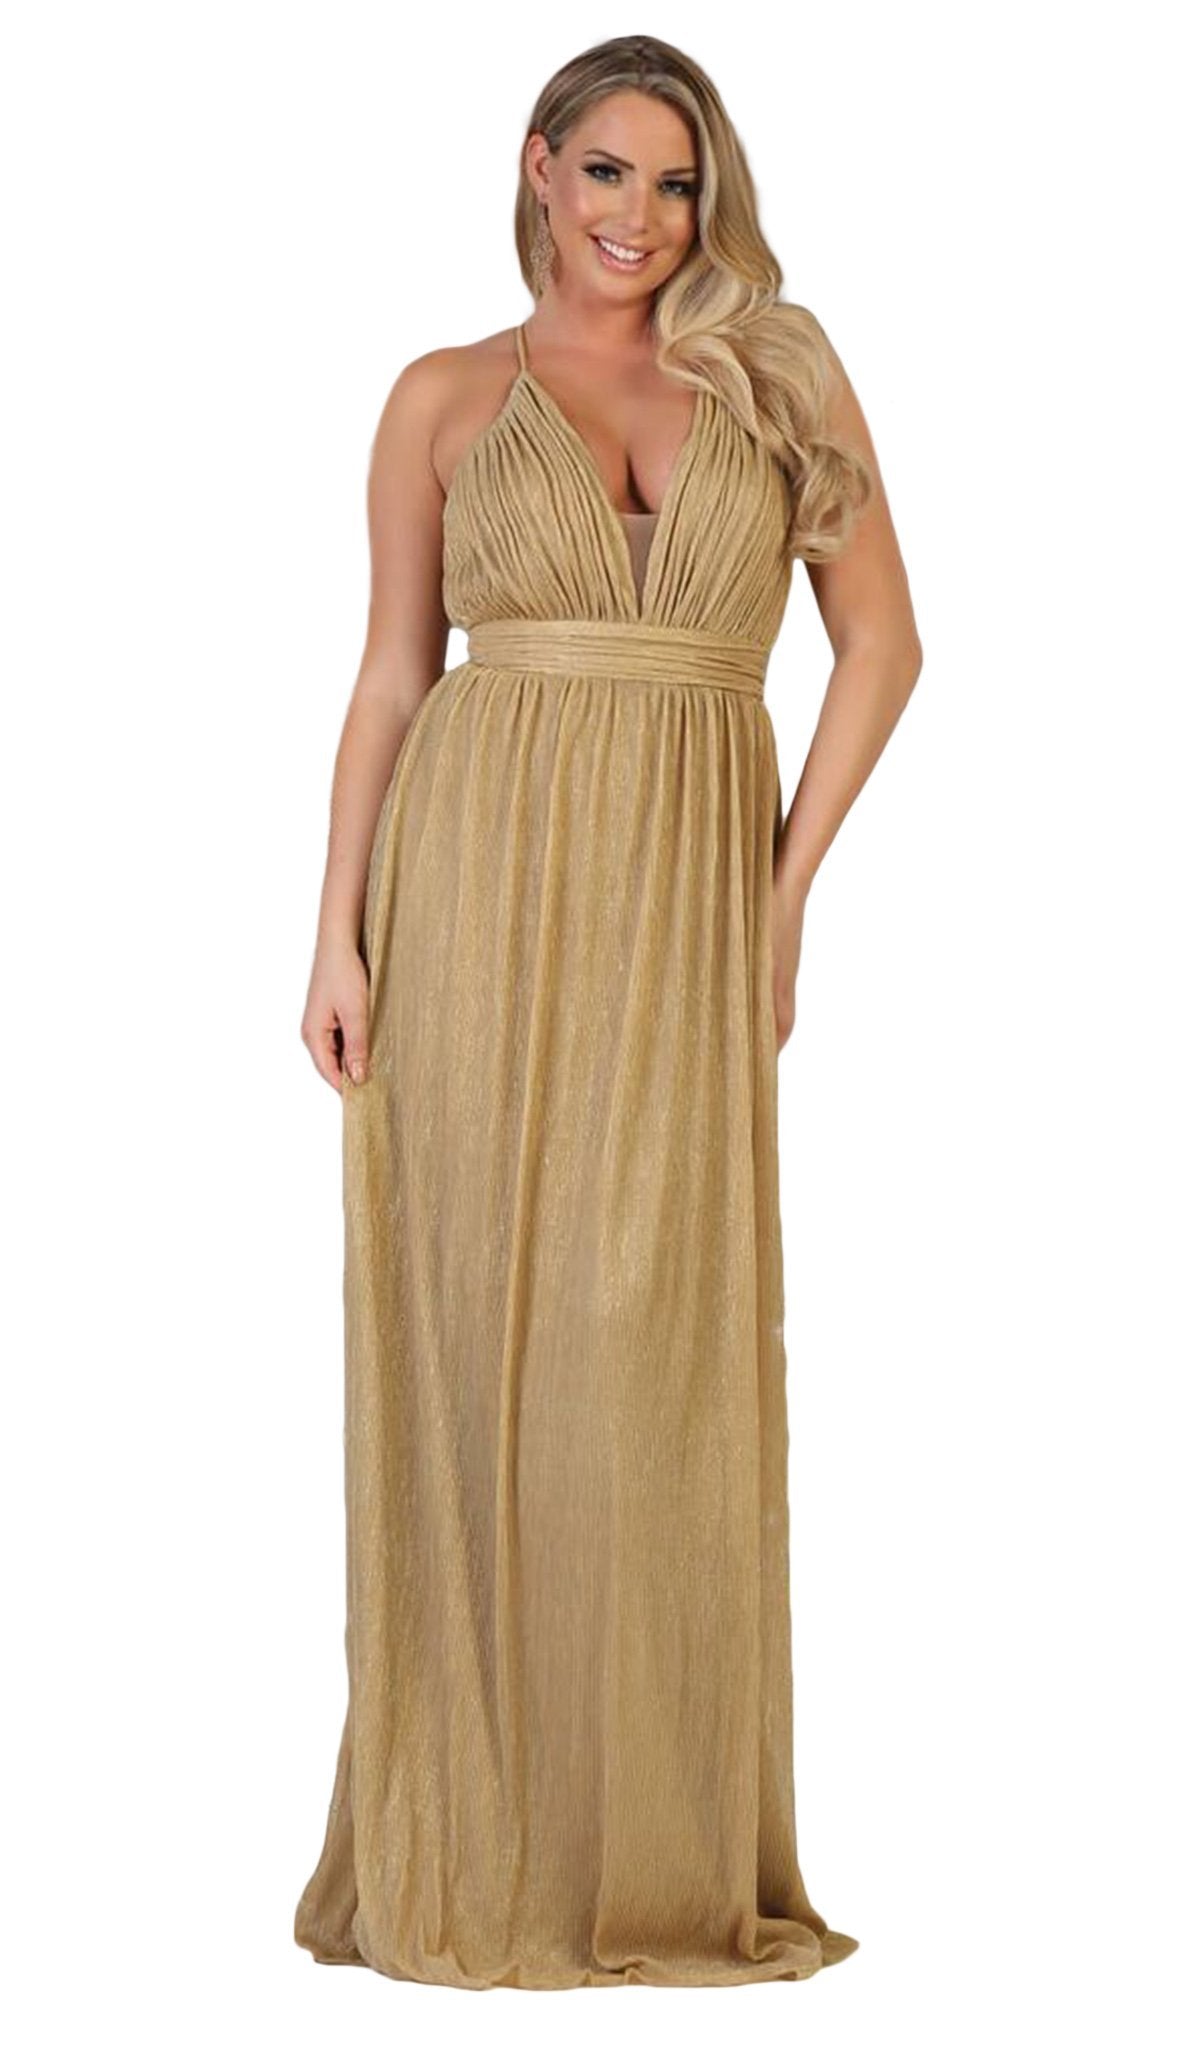 May Queen - Plunging V-Neck Pleated A-Line Dress MQ1635  In Gold